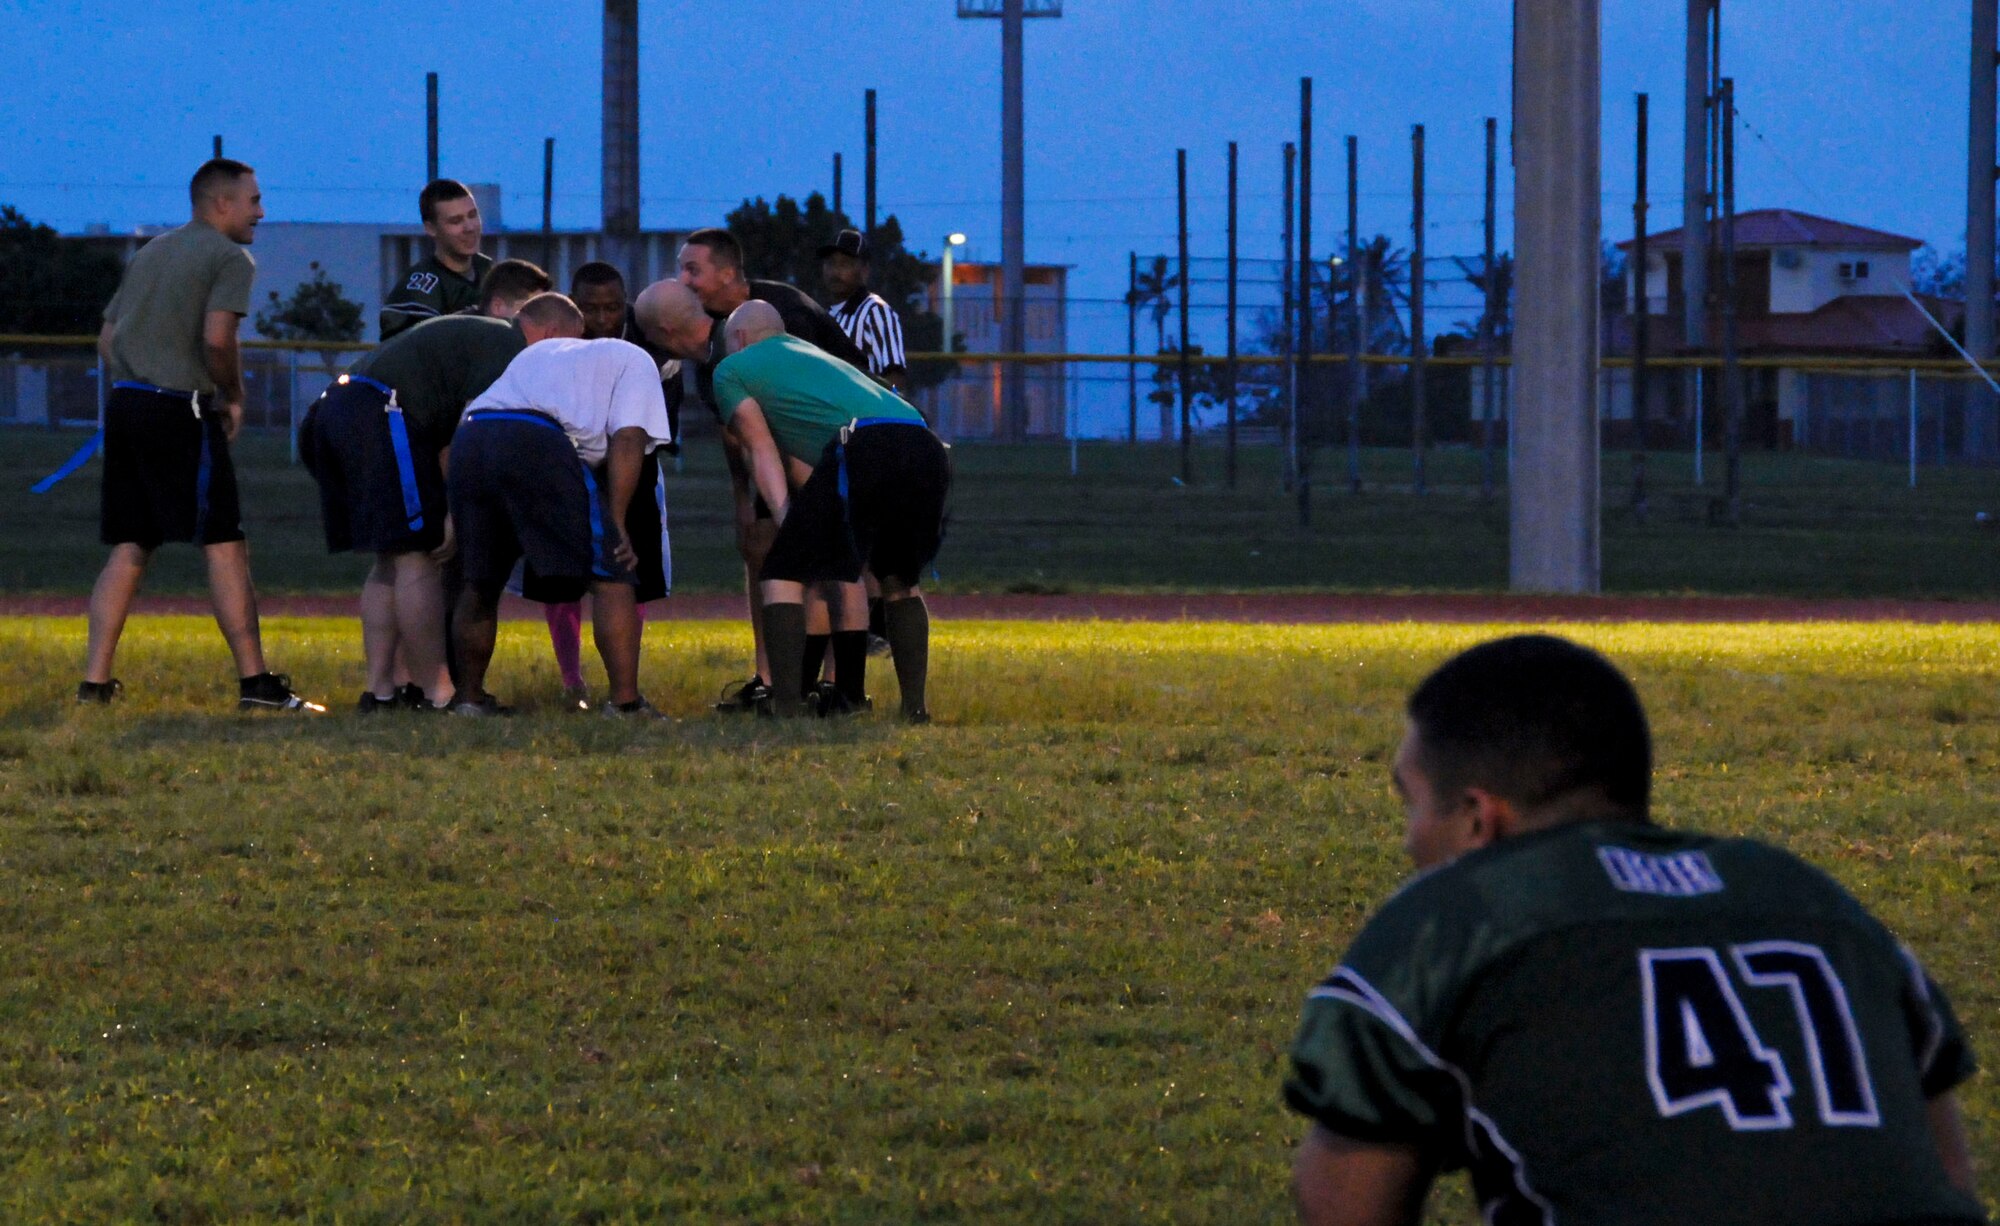 Members of the 36th Civil Engineer Squadron intramural flag football team huddle to decide a game plan for the game against the 94th Army Air and Missile Defense Command Nov. 6, 2013, on Andersen Air Force Base, Guam. The 36th CES defeated the 94th AAMDC 18-14. (U.S. Air Force photo by Airman 1st Class Amanda Morris/Released)